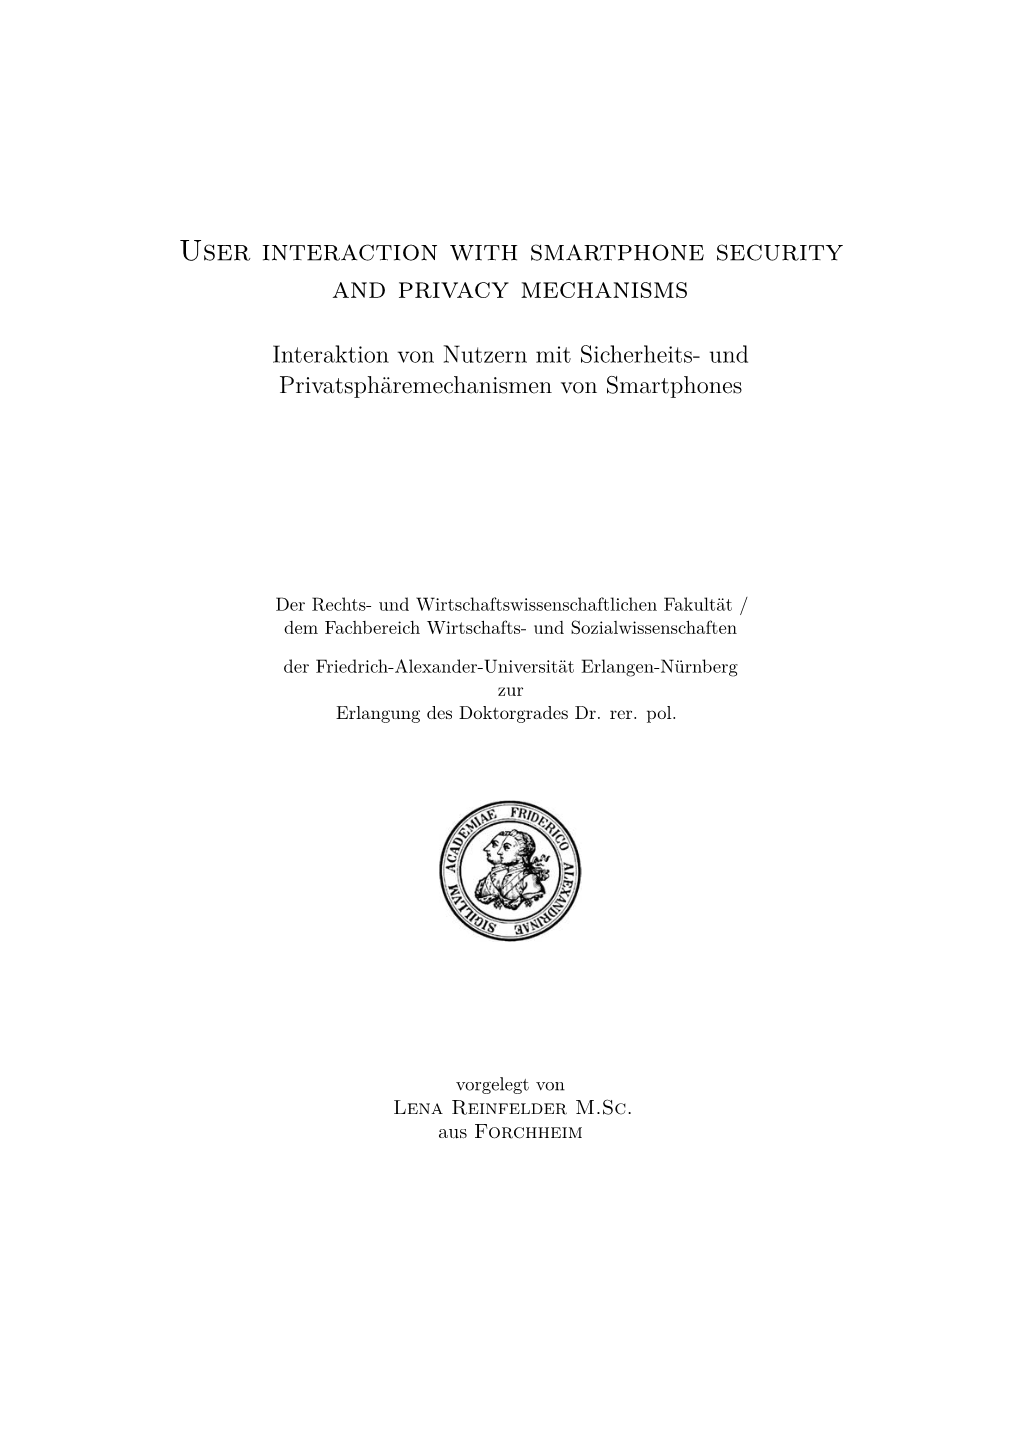 User Interaction with Smartphone Security and Privacy Mechanisms